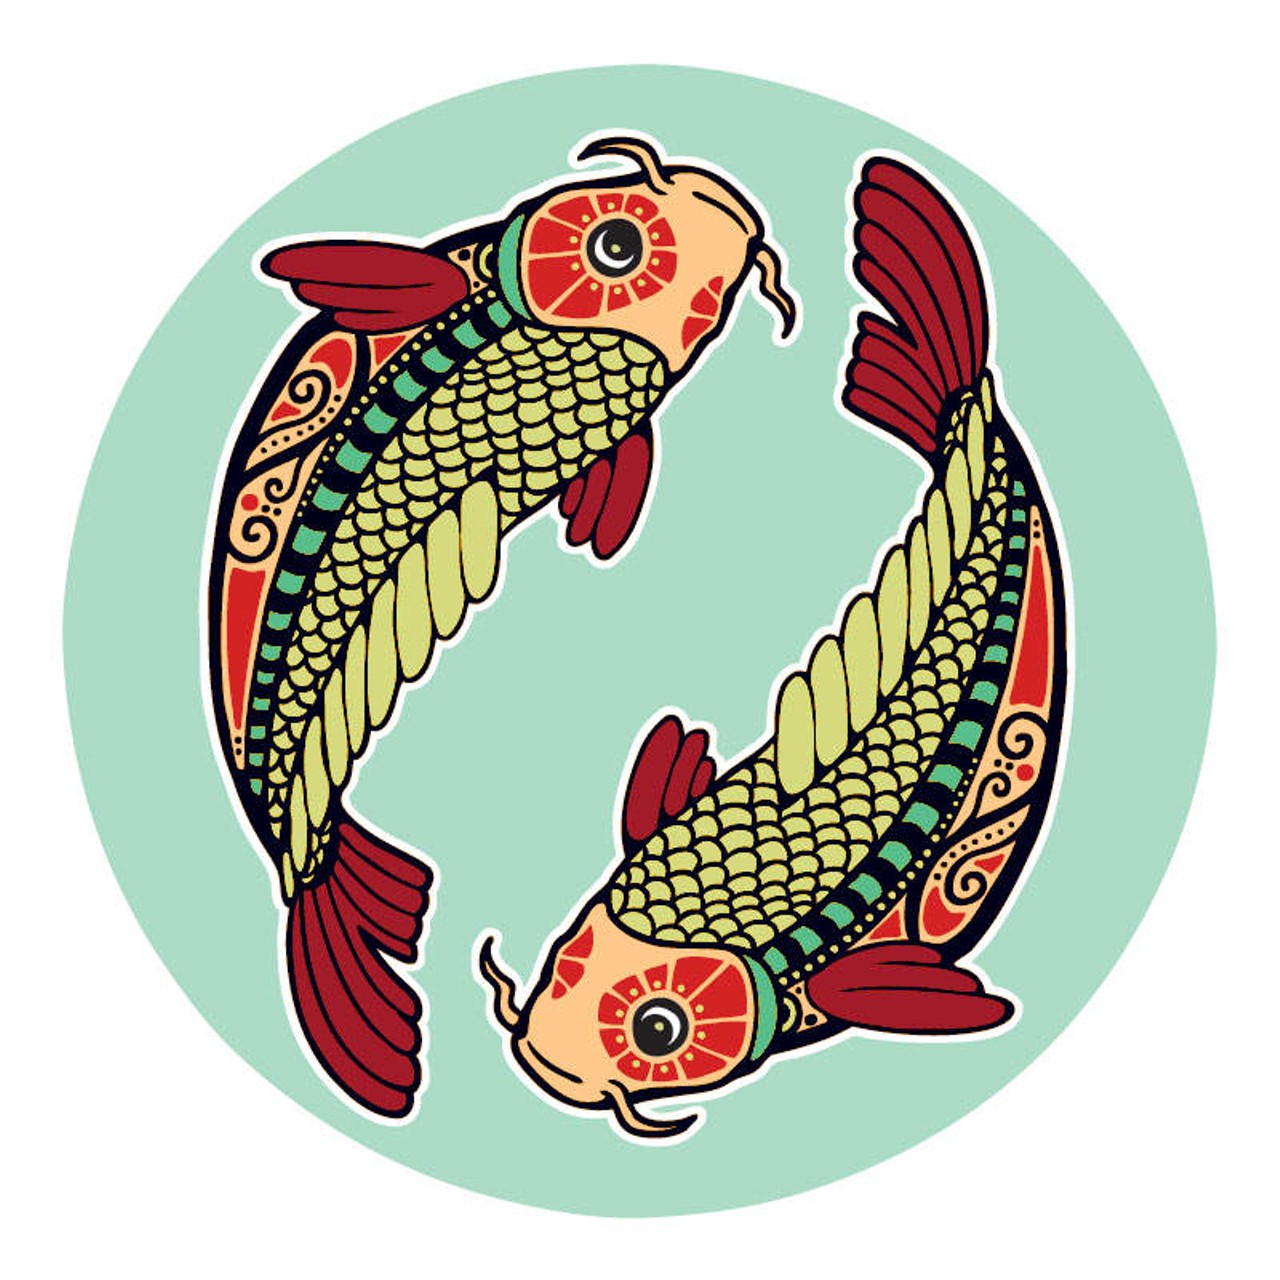 PISCES (Feb. 21-March 20): 
Is it that time of the month, or did you decide to leave town? Those who know you well don&#146;t even know where you went. Is it the changing of the guard on the emotional front that keeps your life and your cards so close to your chest? Elements of paranoia are always nipping at your heels, and the tendency to make things up in your head and convince yourself that they&#146;re true could be keeping you from having a good time with whoever &#145;hasn&#146;t been around in a while.&#146; You don&#146;t need to hide out forever. It&#146;s time to reconnect and bring your light back to the fire.